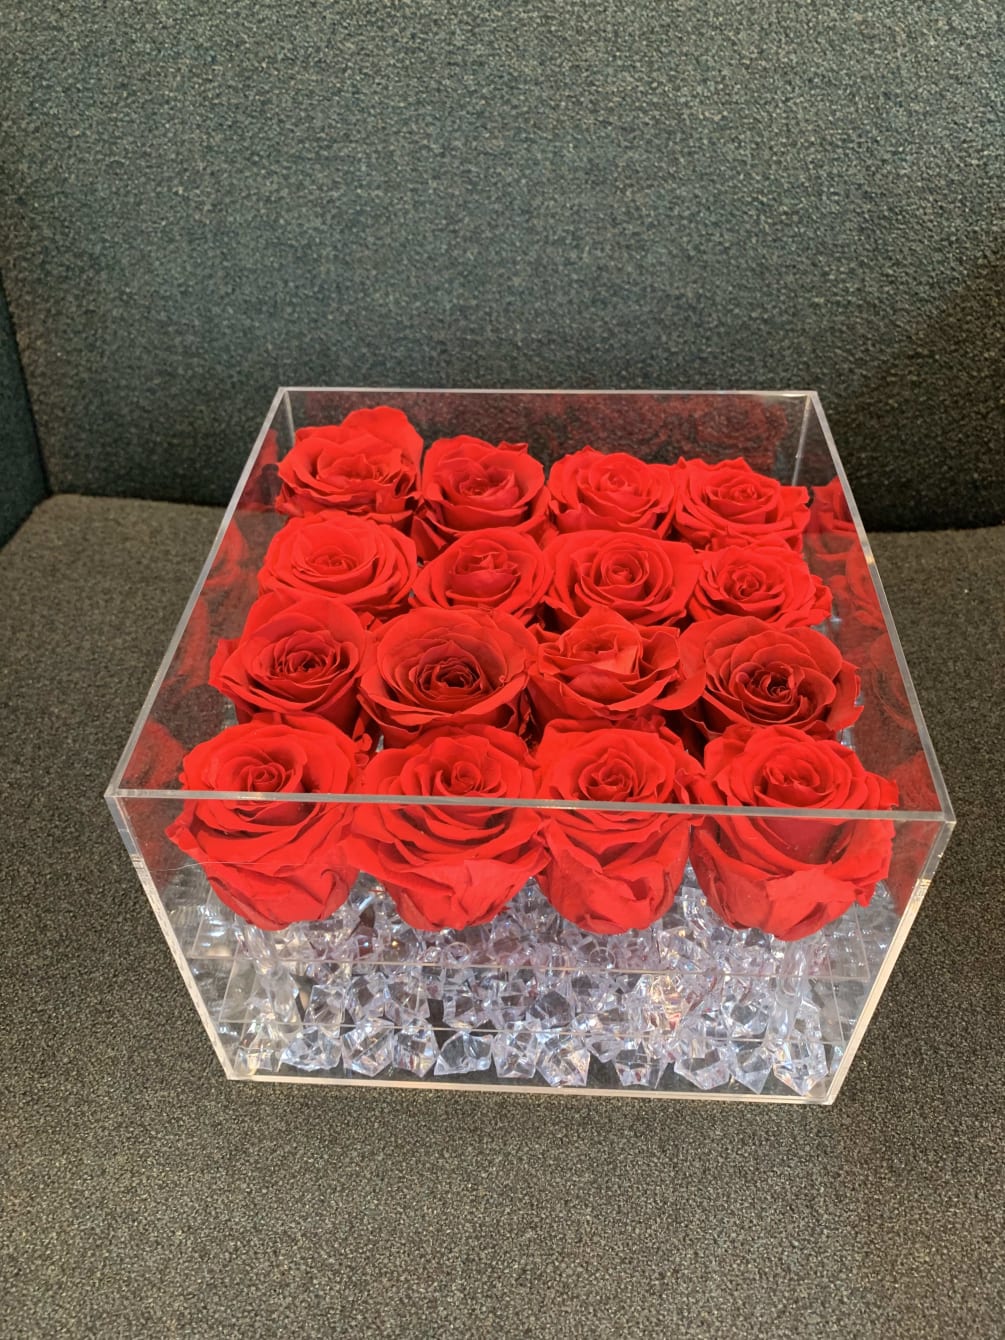 Has 16 real preserved roses set in a quality clear box with